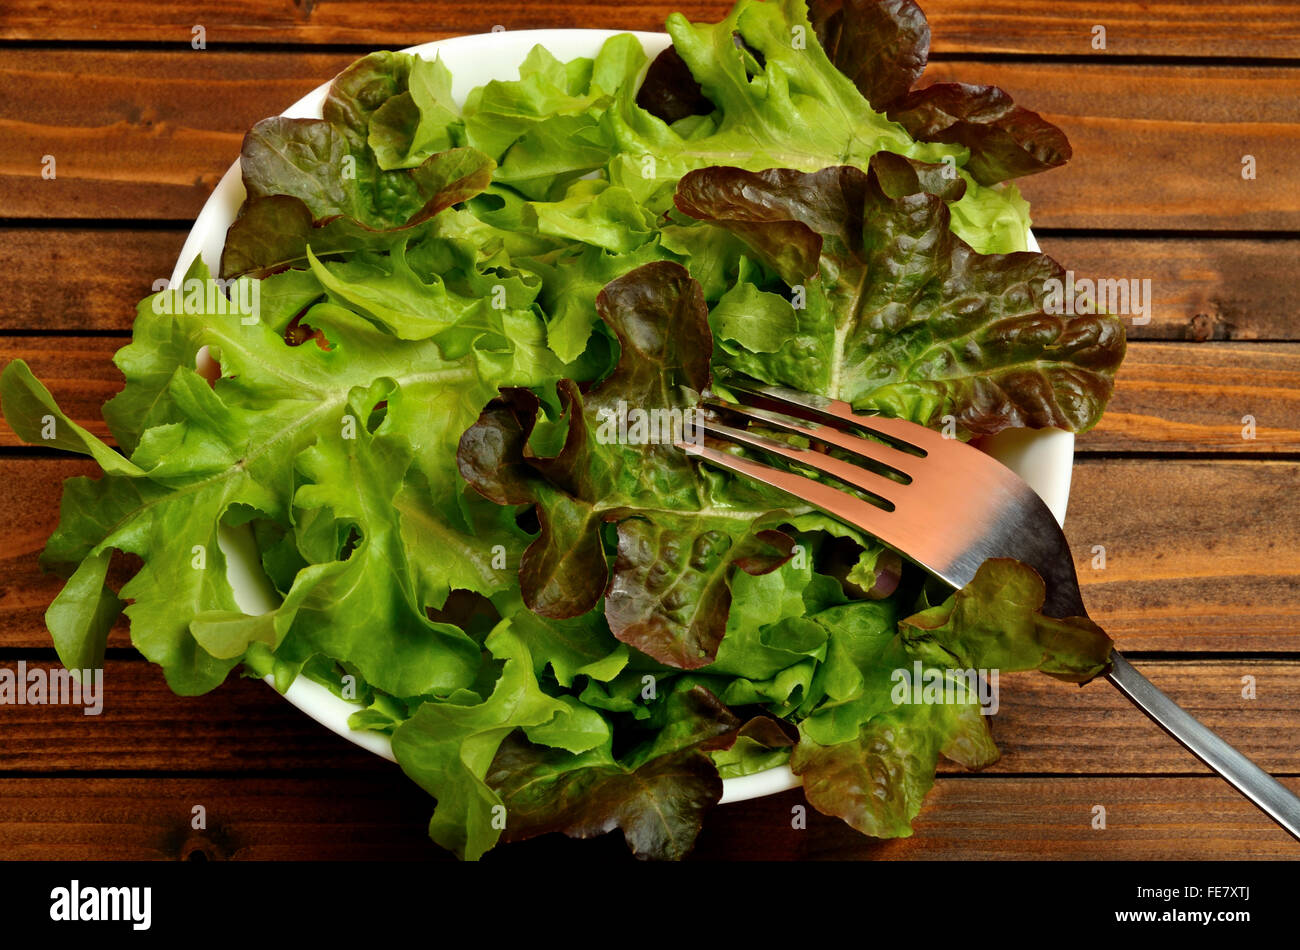 Bowl with lettuce salad on wooden table Stock Photo